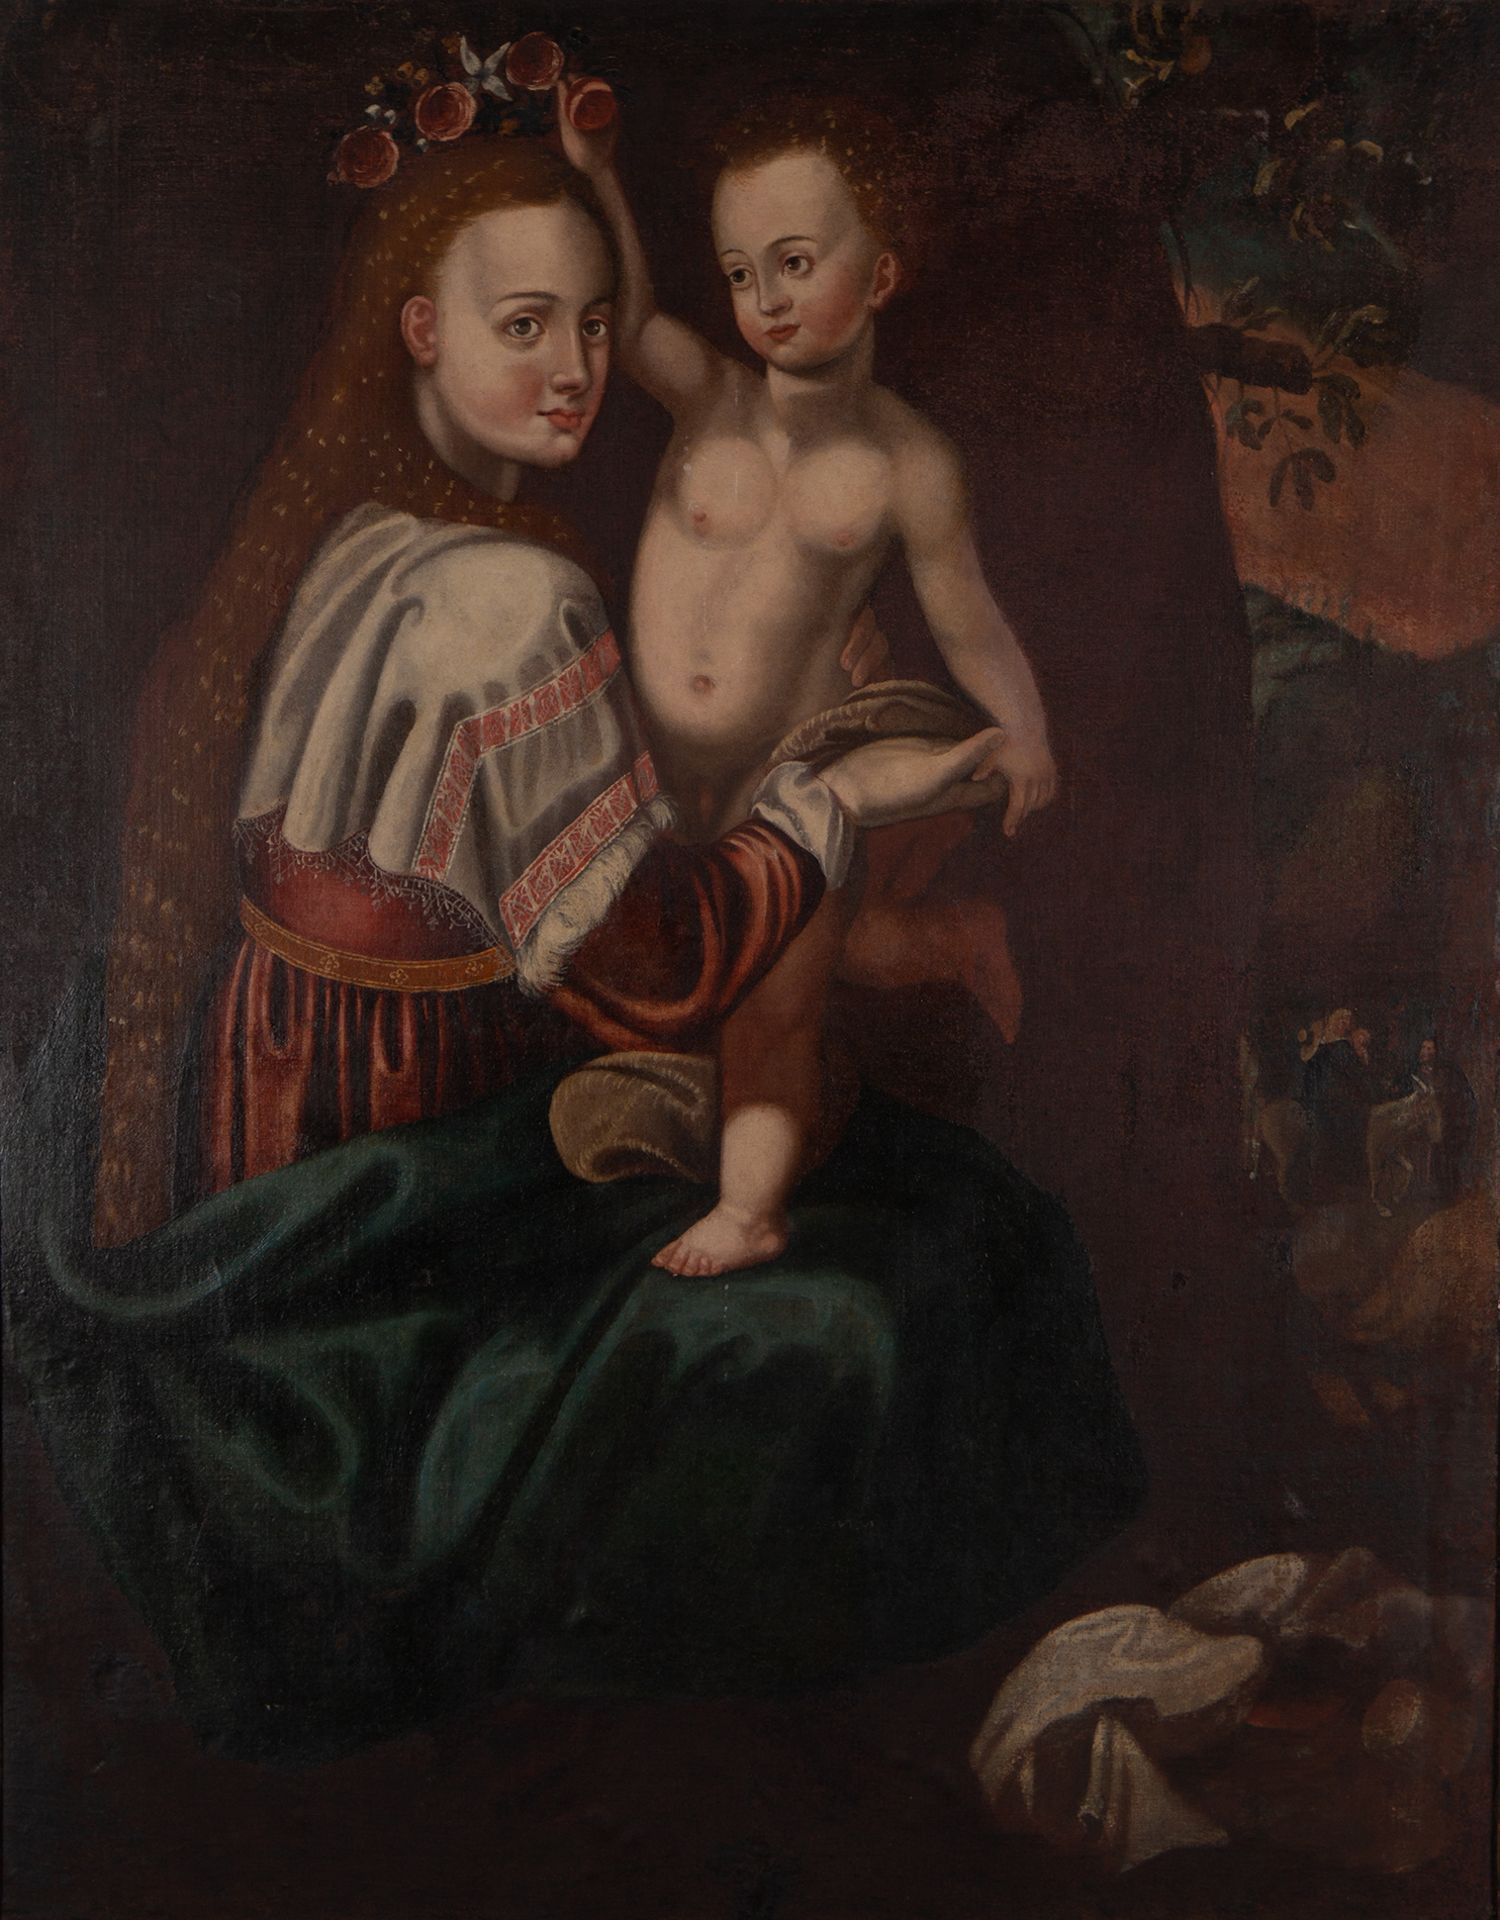 Virgin with Child in her arms, Italian school of the 17th century - Image 2 of 10